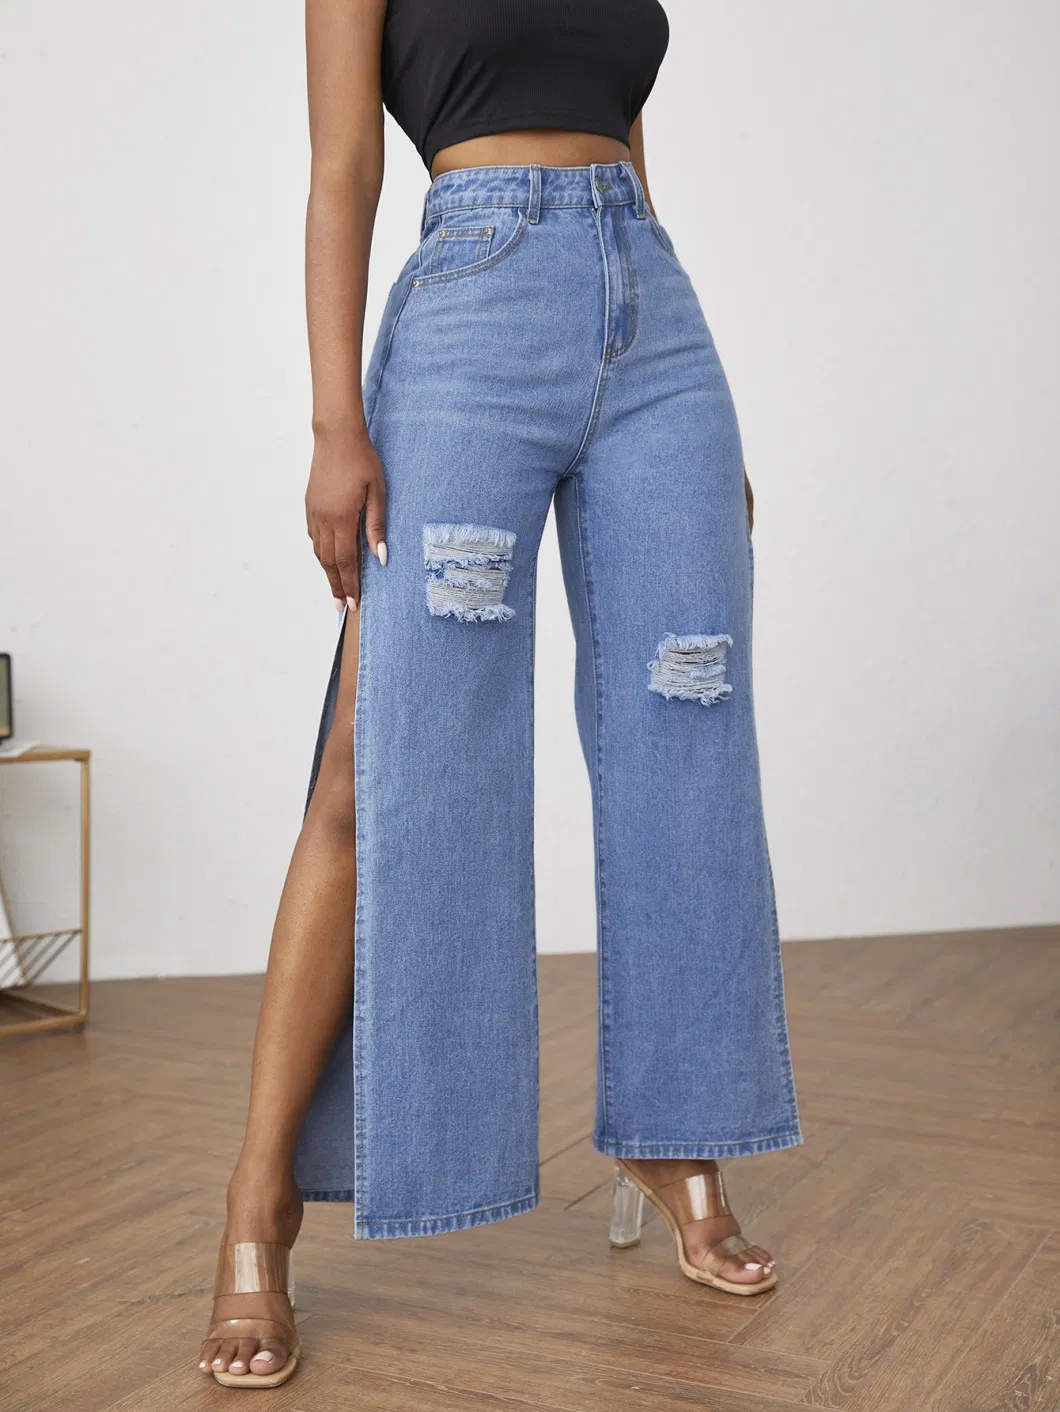 Middle Blue Color Wide Leg High Split on Both Side with Scratch on Front High Wasited Women New Fashion Design Denim Jeans